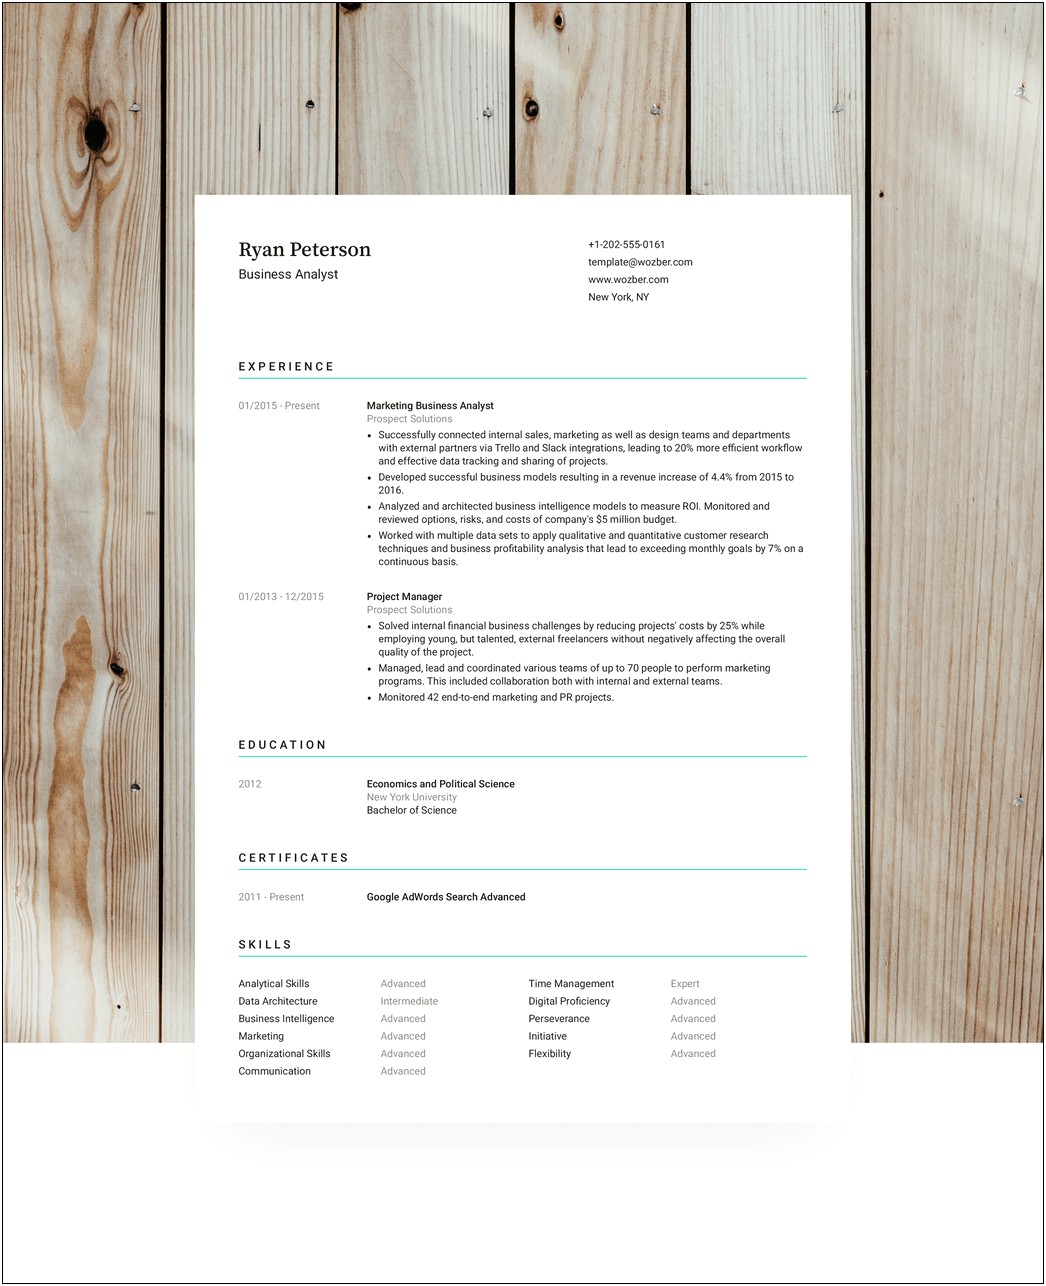 Ats Resume Template 2017 Free Download